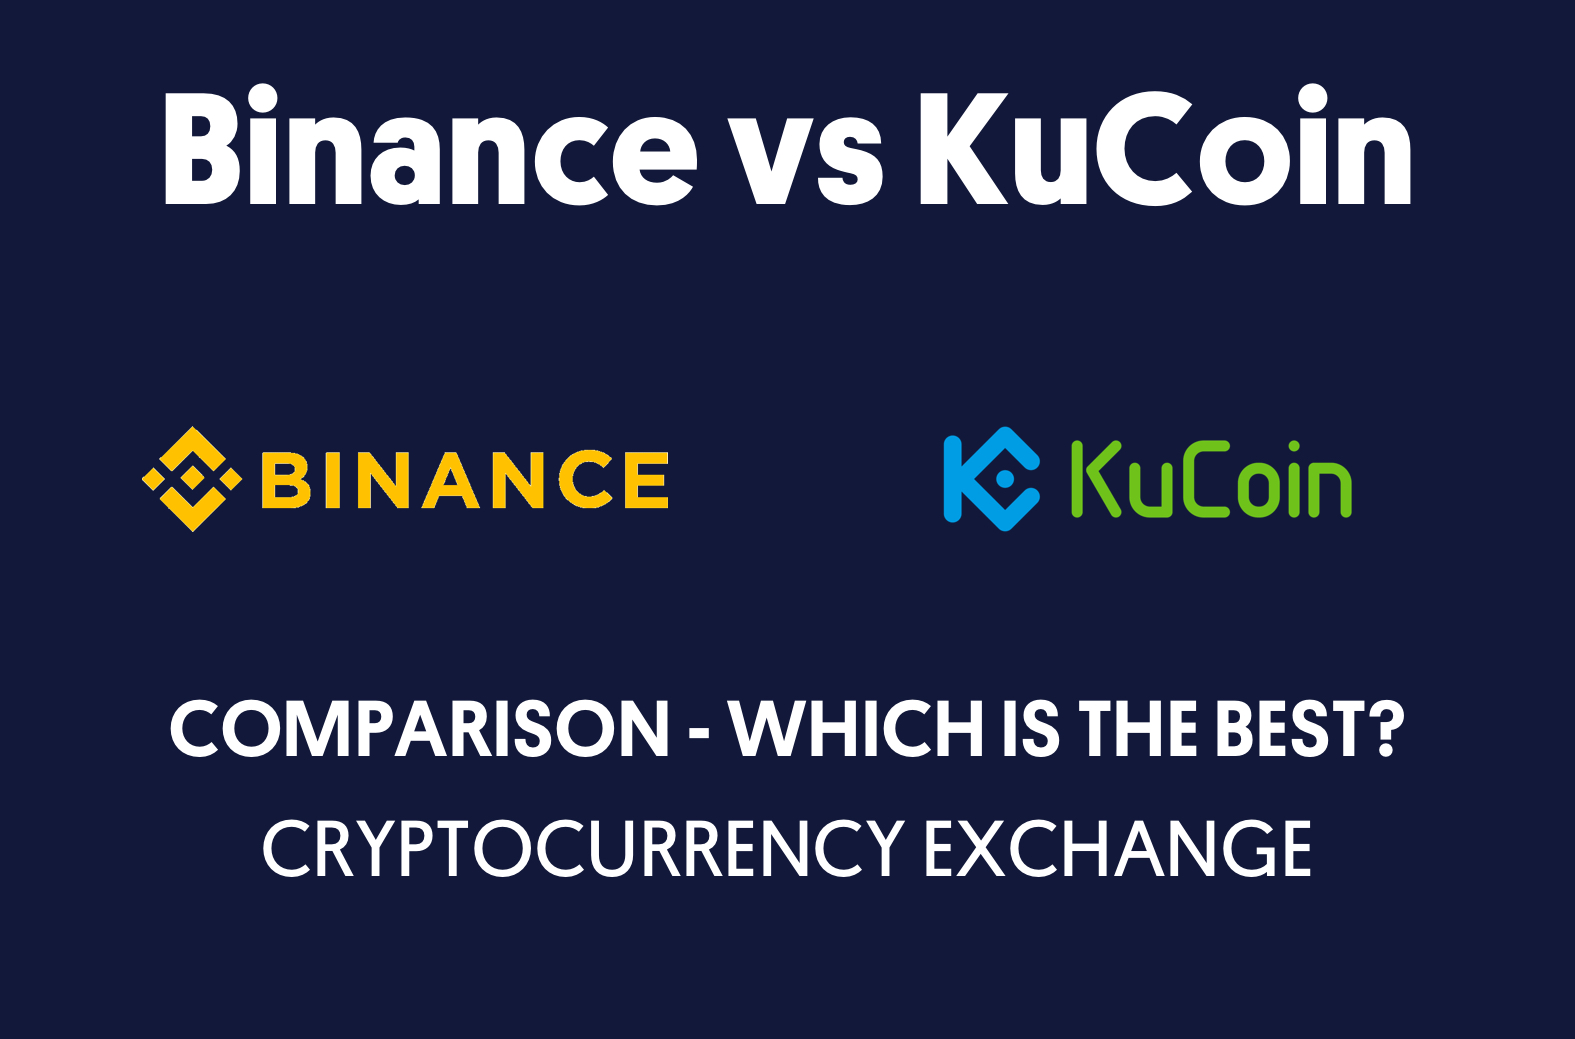 Binance vs KuCoin - which is the best cryptocurrency exchange?